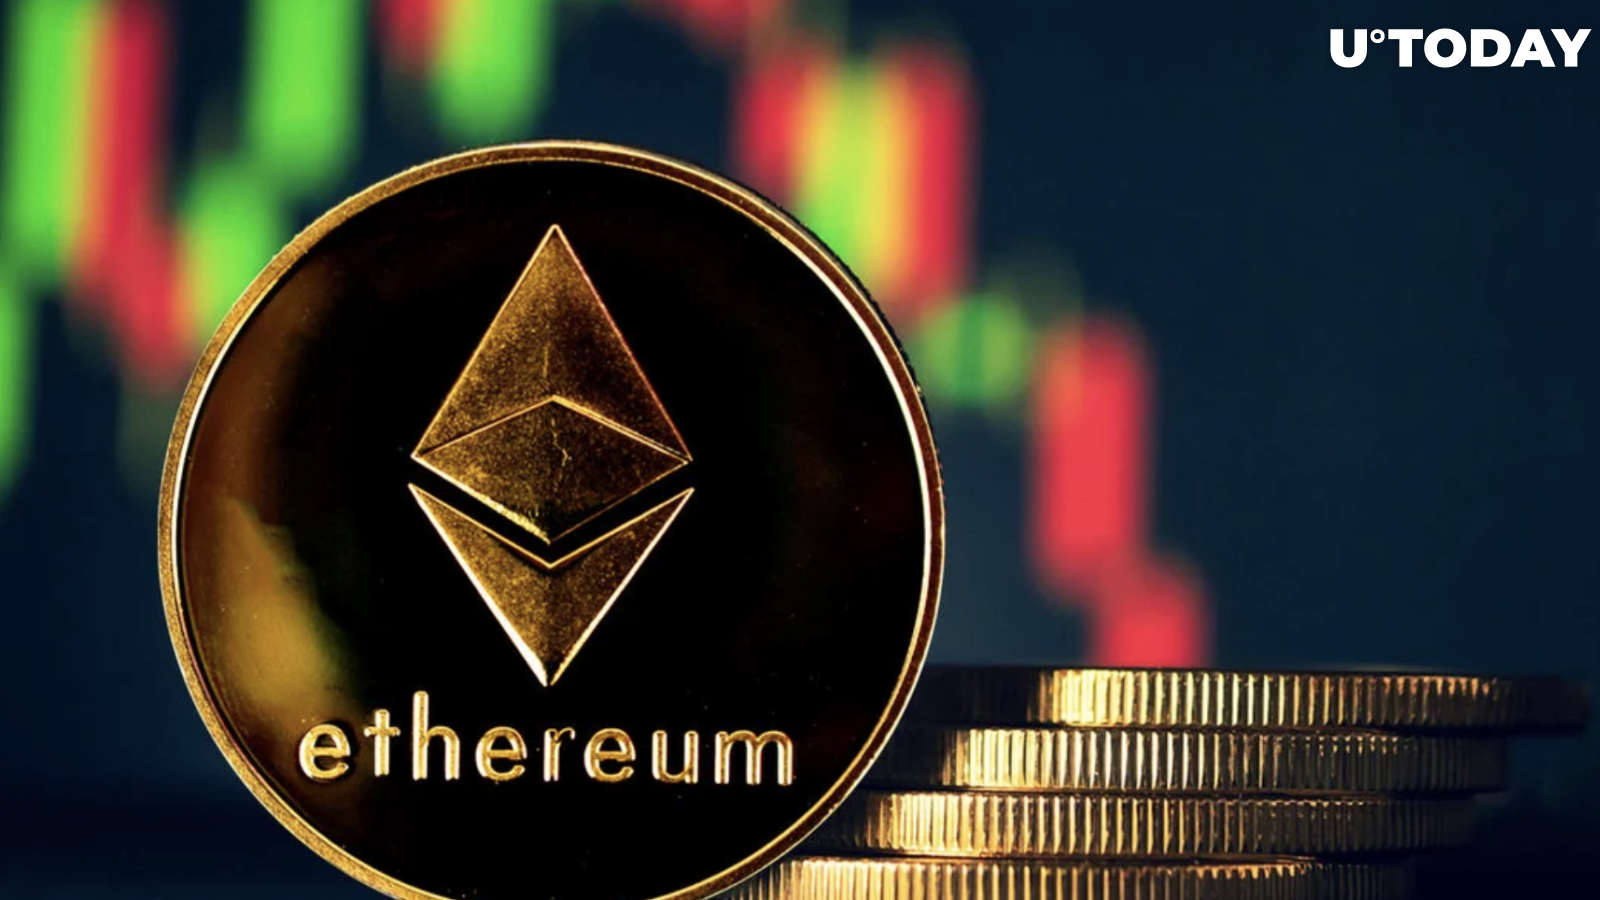 Ethereum's Top 10 Wallets Increase Holdings